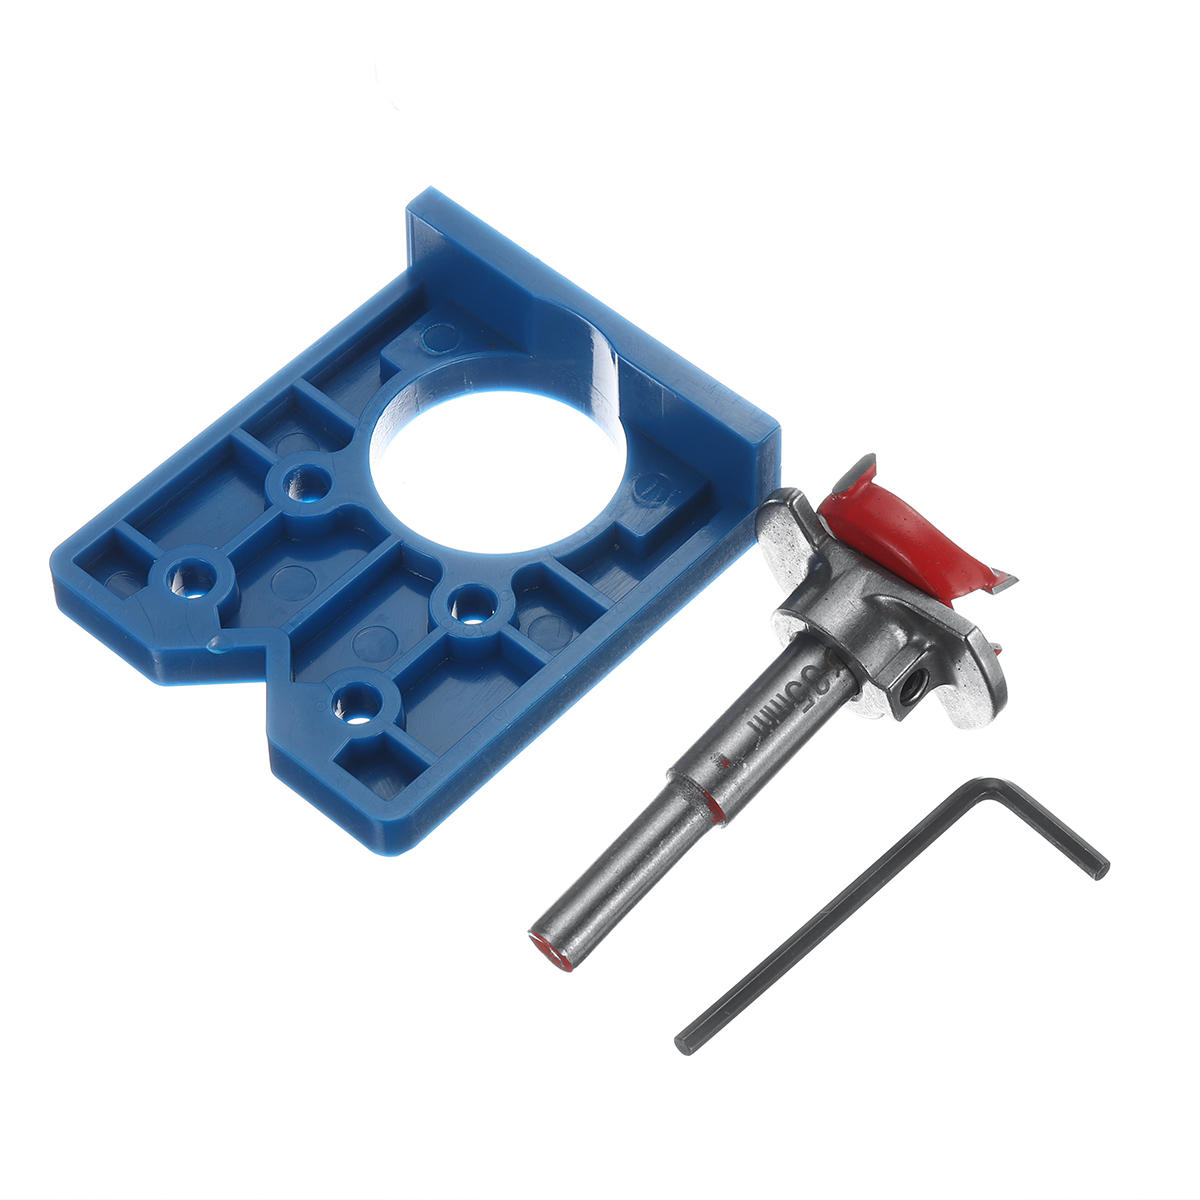 

35mm ABS Hinge Hole Drilling Jig Set Drill Guide Tool Kit Template Positioner Woodworking